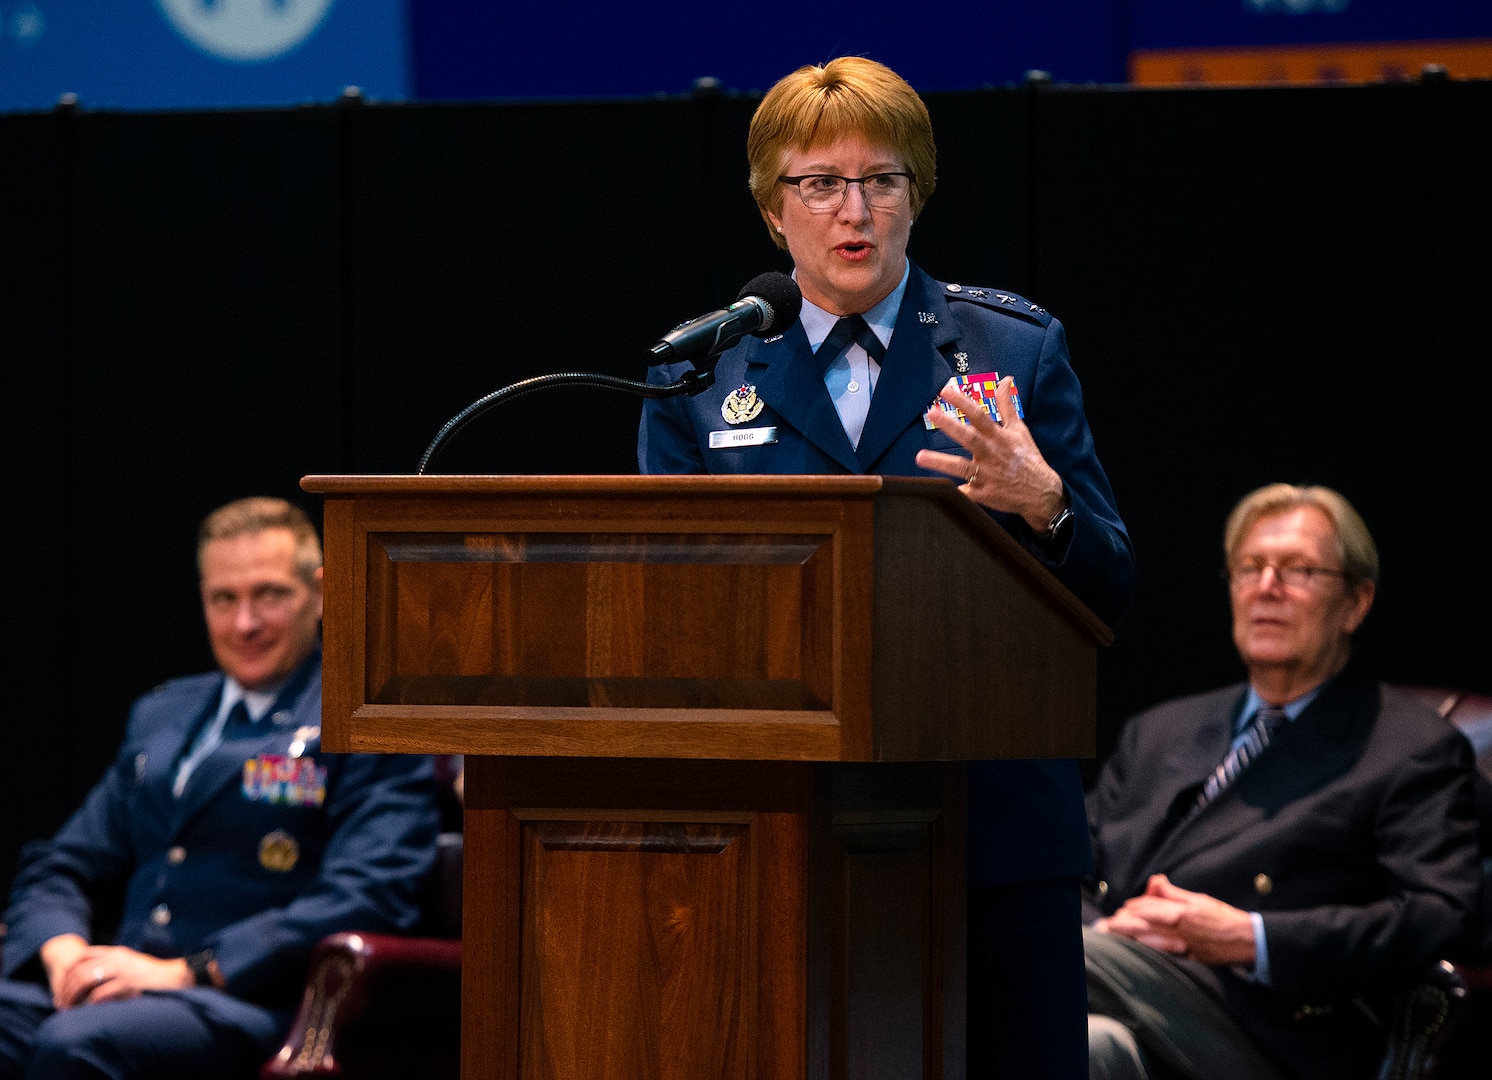 Air Force Lt. Gen. Dorothy Hogg, Air Force surgeon general, gives the graduation address at the Wright-Patterson Medical and Allied Health Education Programs graduation ceremony May 27, 2021, in the National Museum of the U.S. Air Force as Col. Christian Lyons, 88th Medical Group commander, and Albert Painter, dean of the Wright State University Boonshoft School of Medicine, looks on. More than 70 Air Force officers were recognized for completing their medical residencies in local hospitals including the Wright-Patterson Air Force Base, Ohio, Medical Center and the Dayton Veterans Affairs Medical Center. (U.S. Air Force photo by R.J. Oriez)